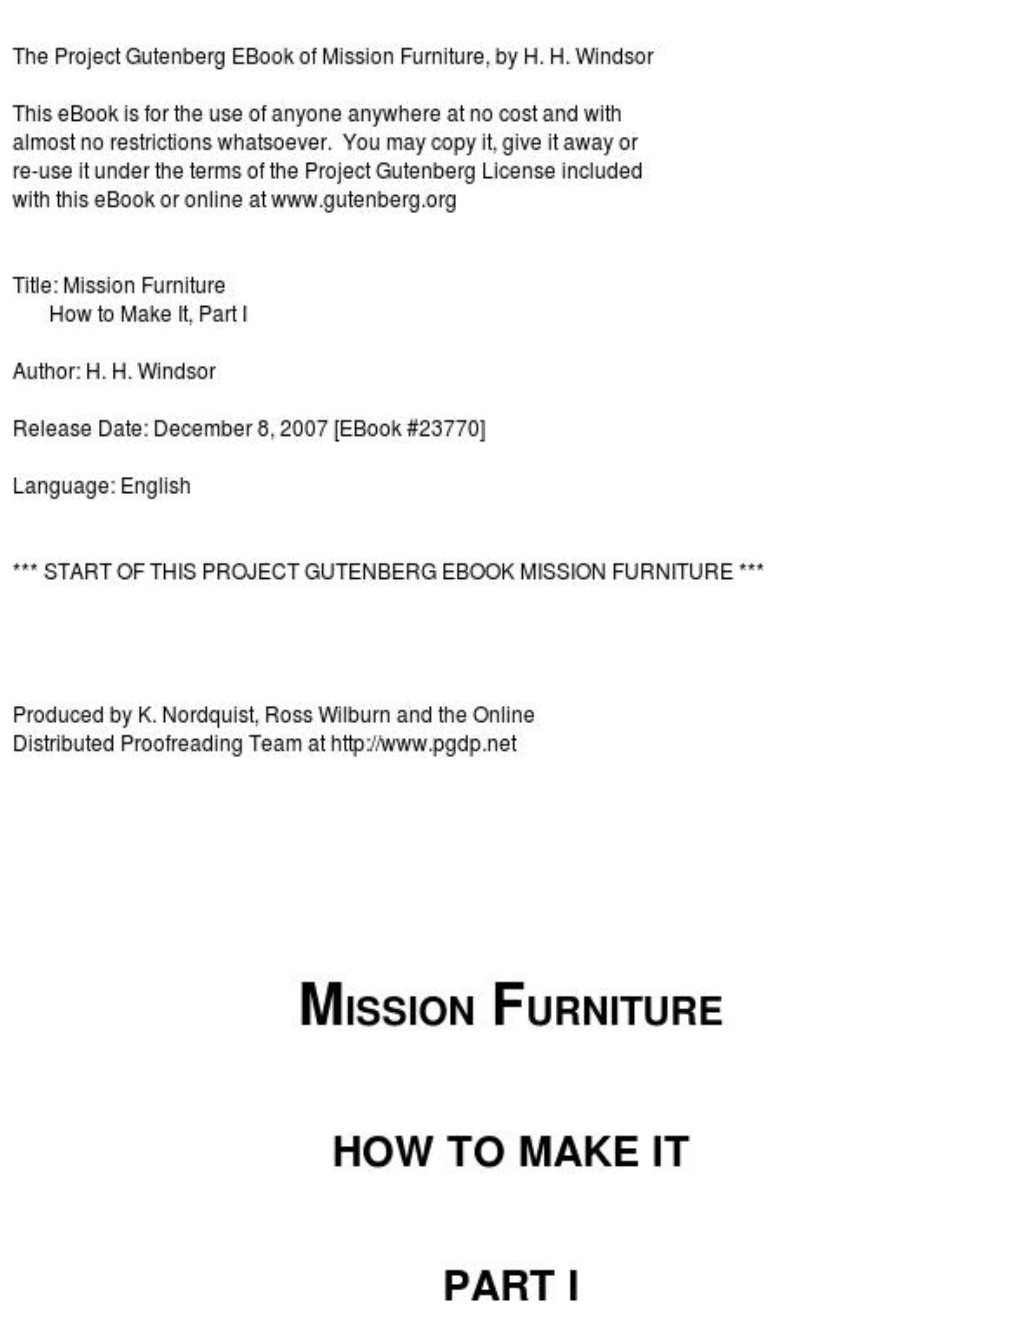 Mission Furniture: How to Make It, Part 1